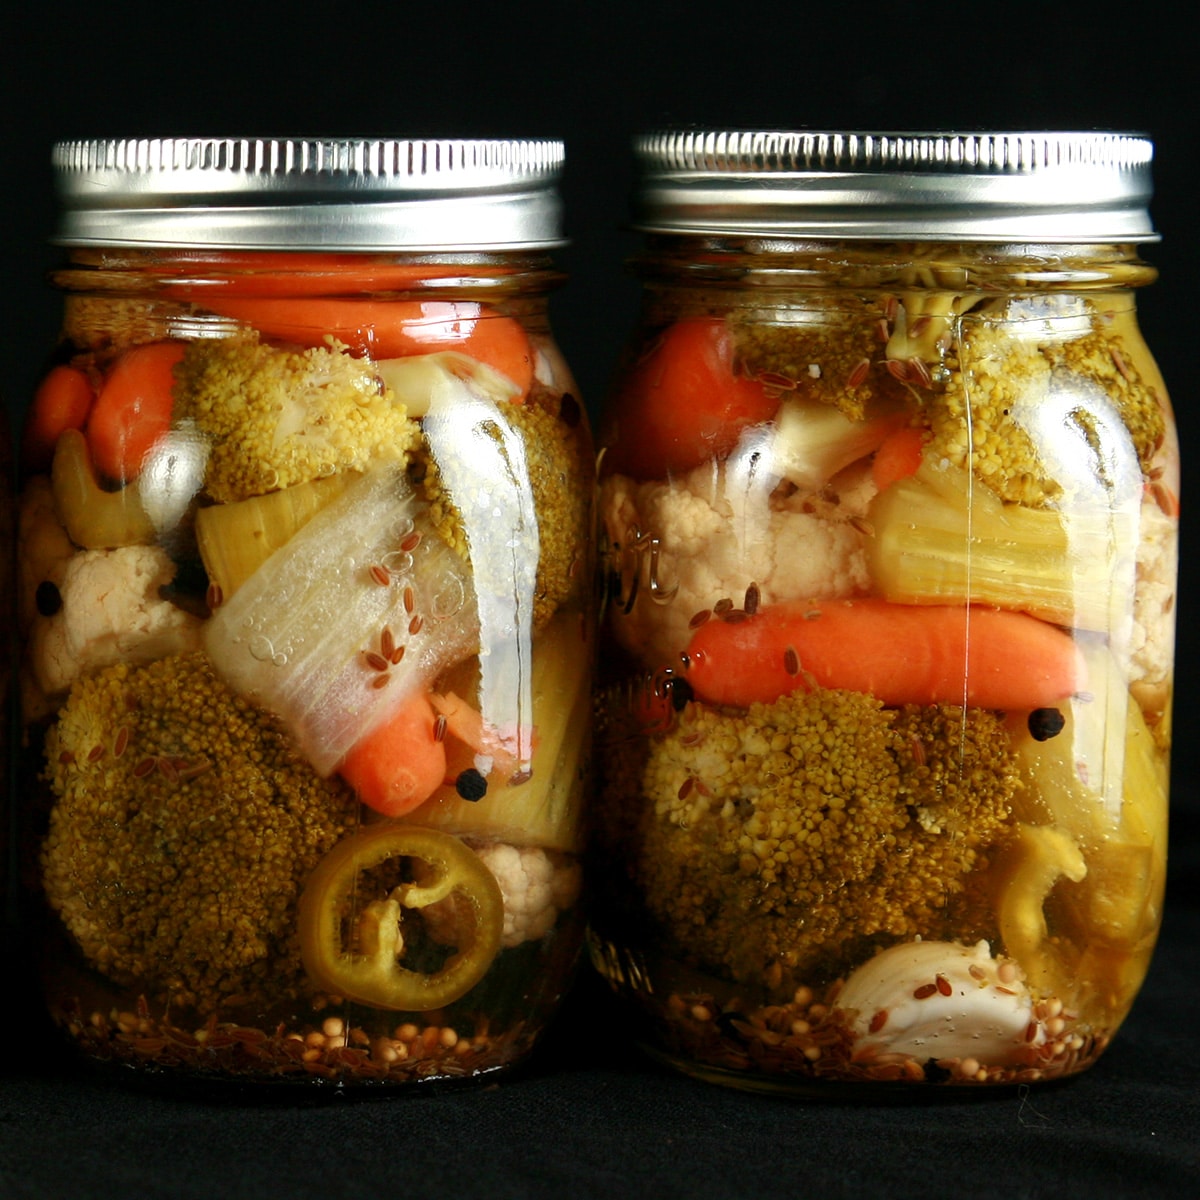 2 jars of mixed vegetable pickles on a black background. Baby carrots, broccoli, onion, celery, cauliflower, and jalapeno are all visible.